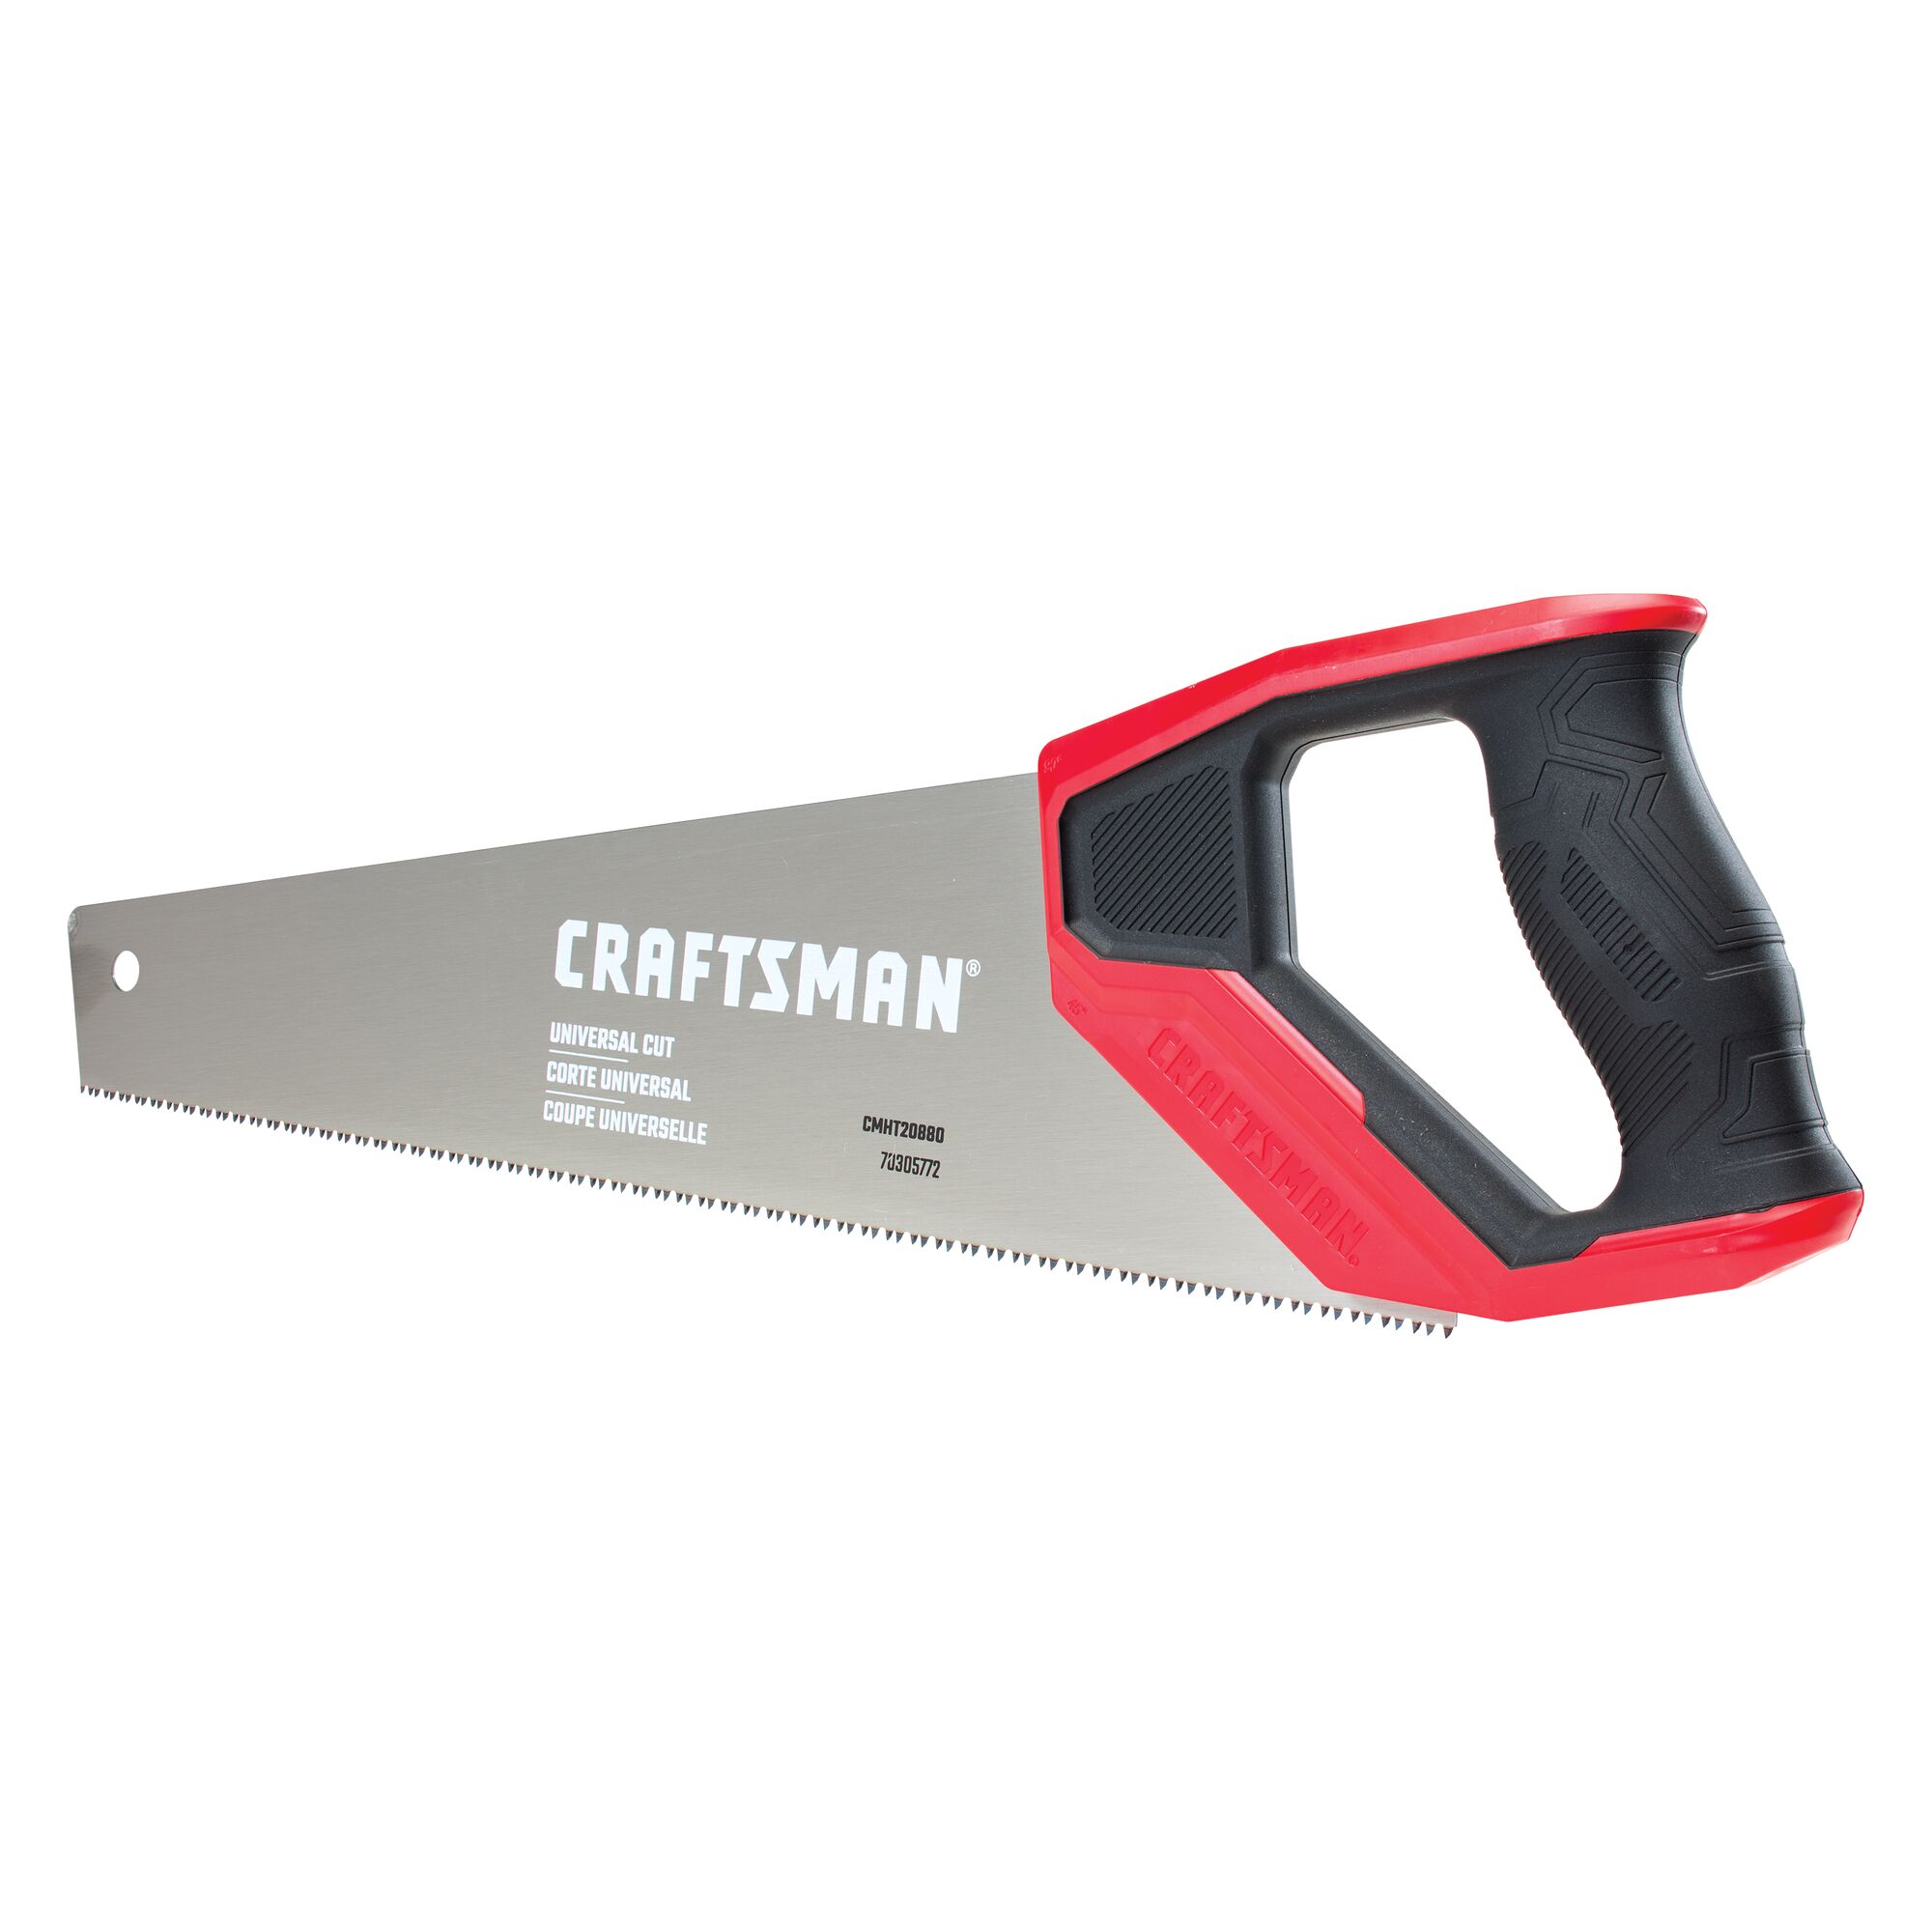 View of CRAFTSMAN Handsaw on white background